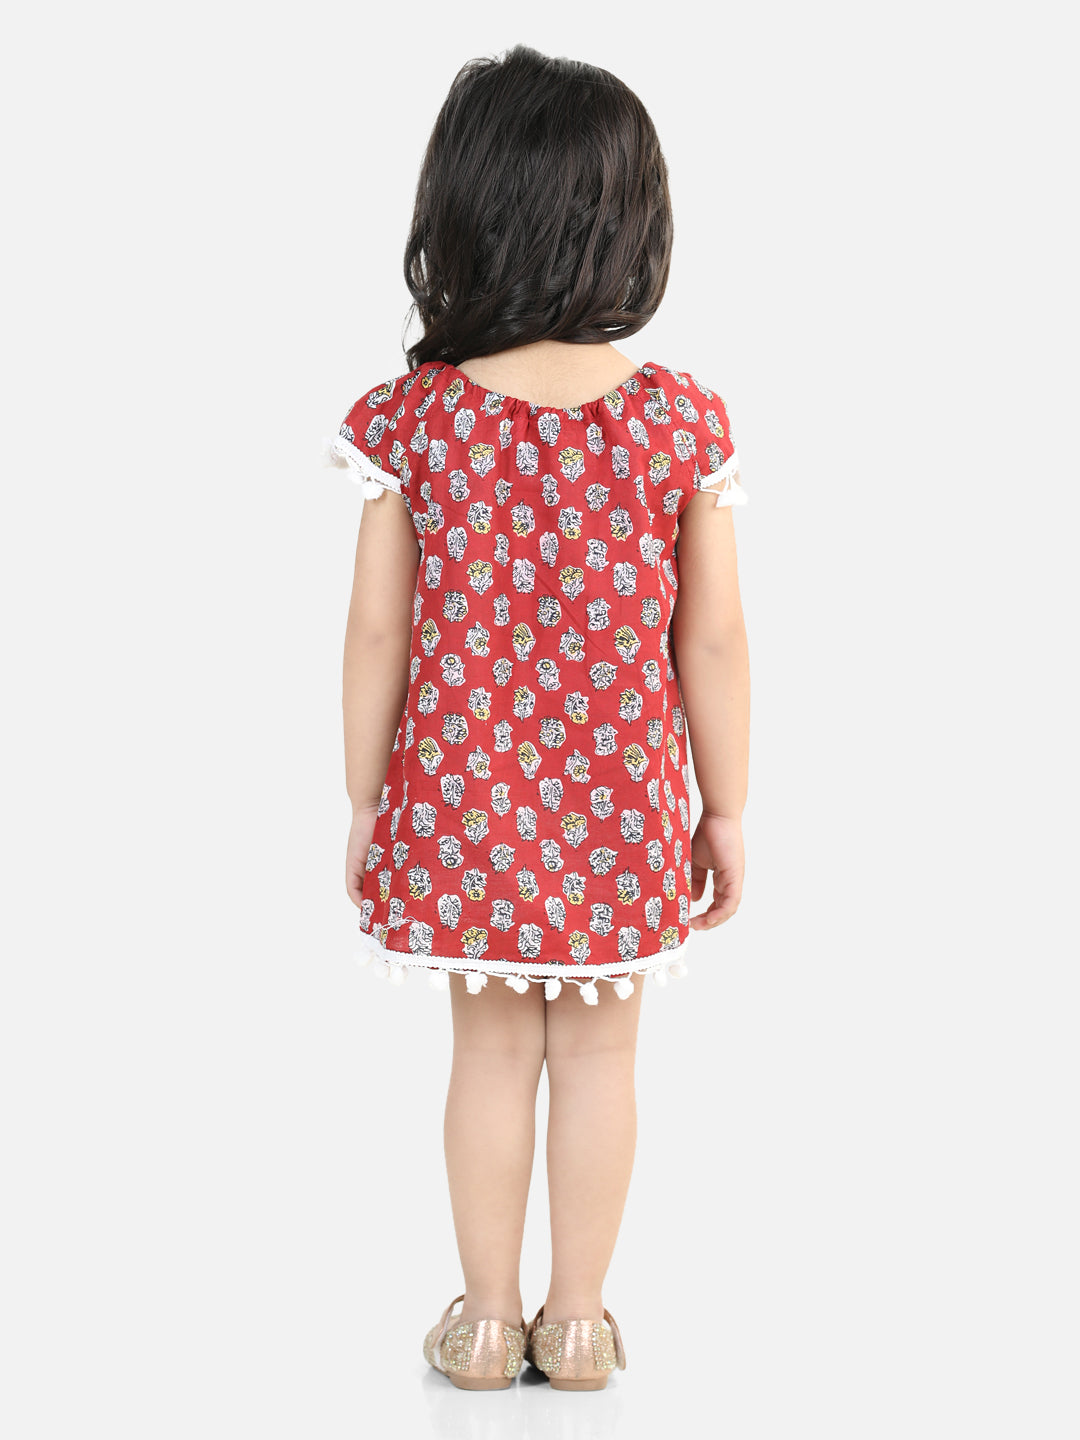 BownBee 100% Cotton Printed with Pompom Jhabla Frock for Girls- Maroon